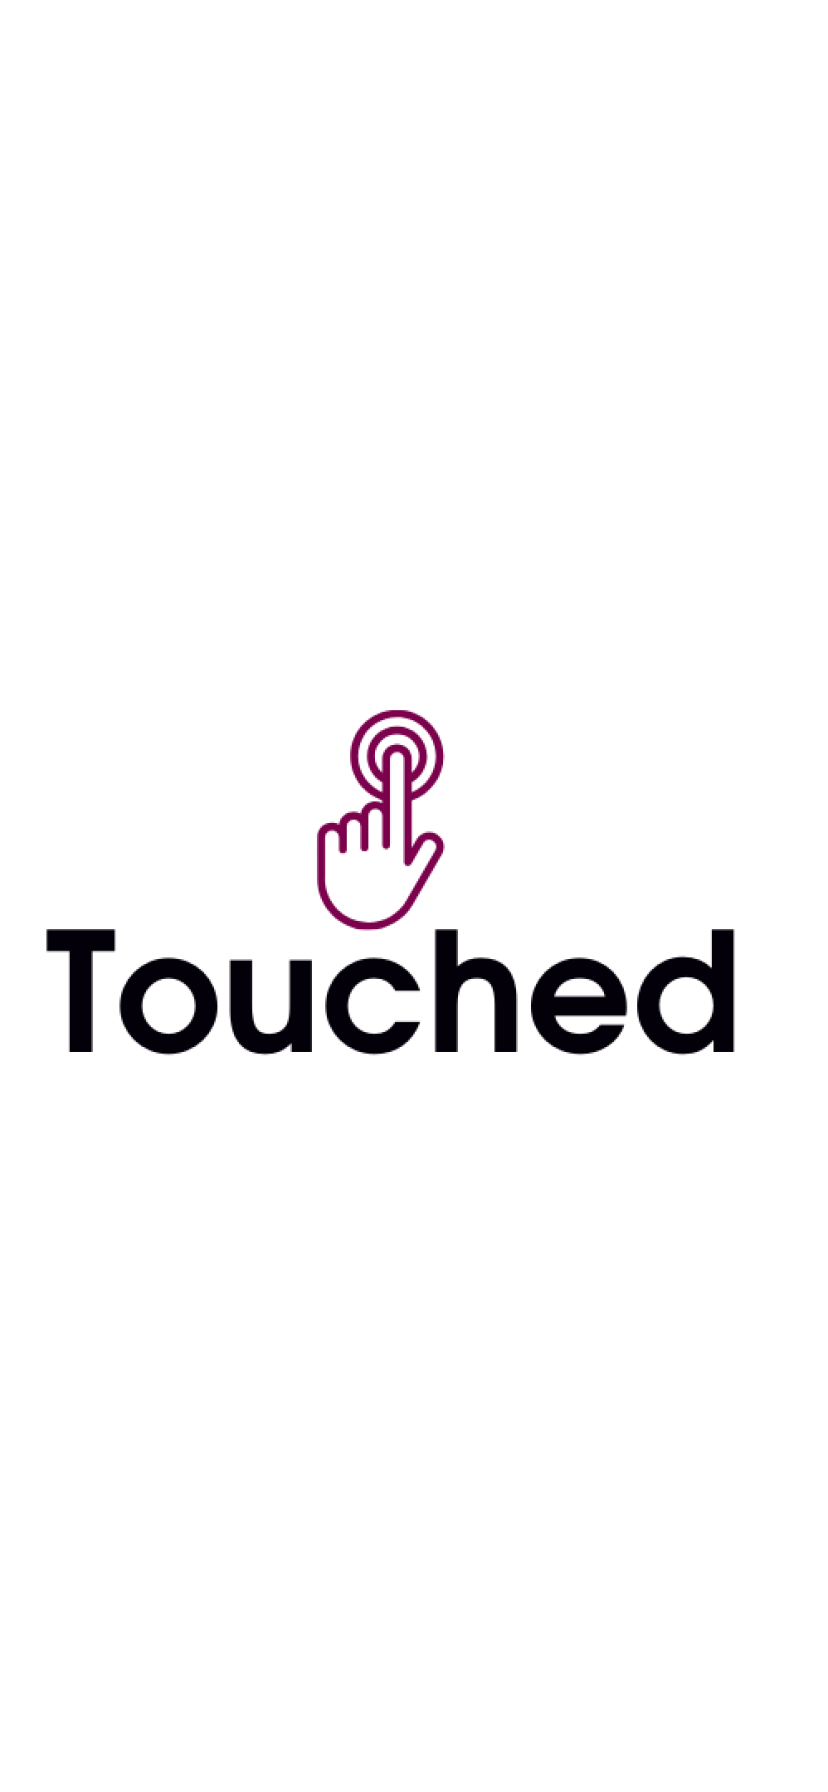 Touched.co Domain Name For Sale